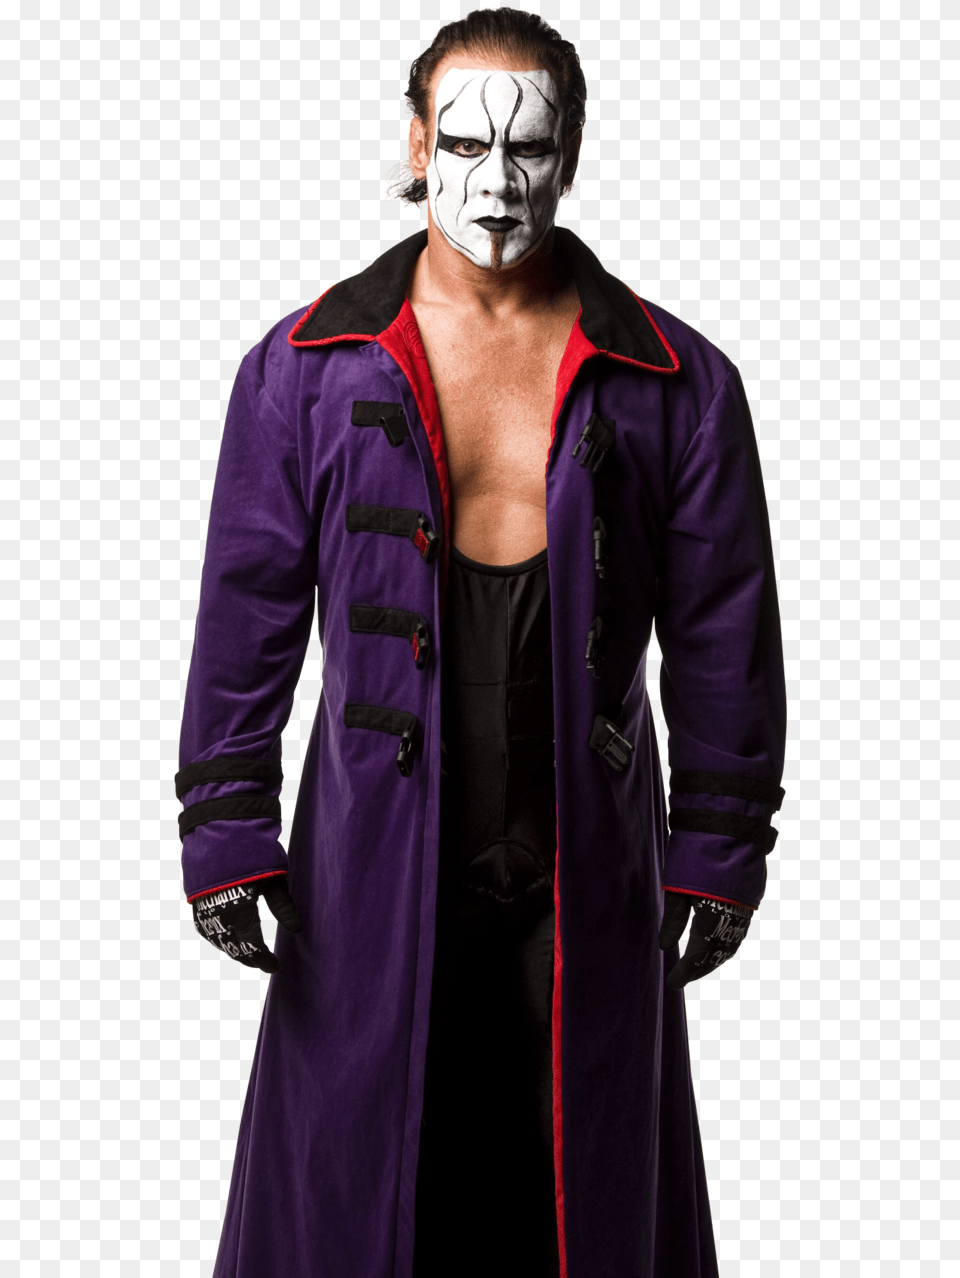 Hd Sting Transparent Image Sting, Clothing, Coat, Overcoat, Glove Free Png Download